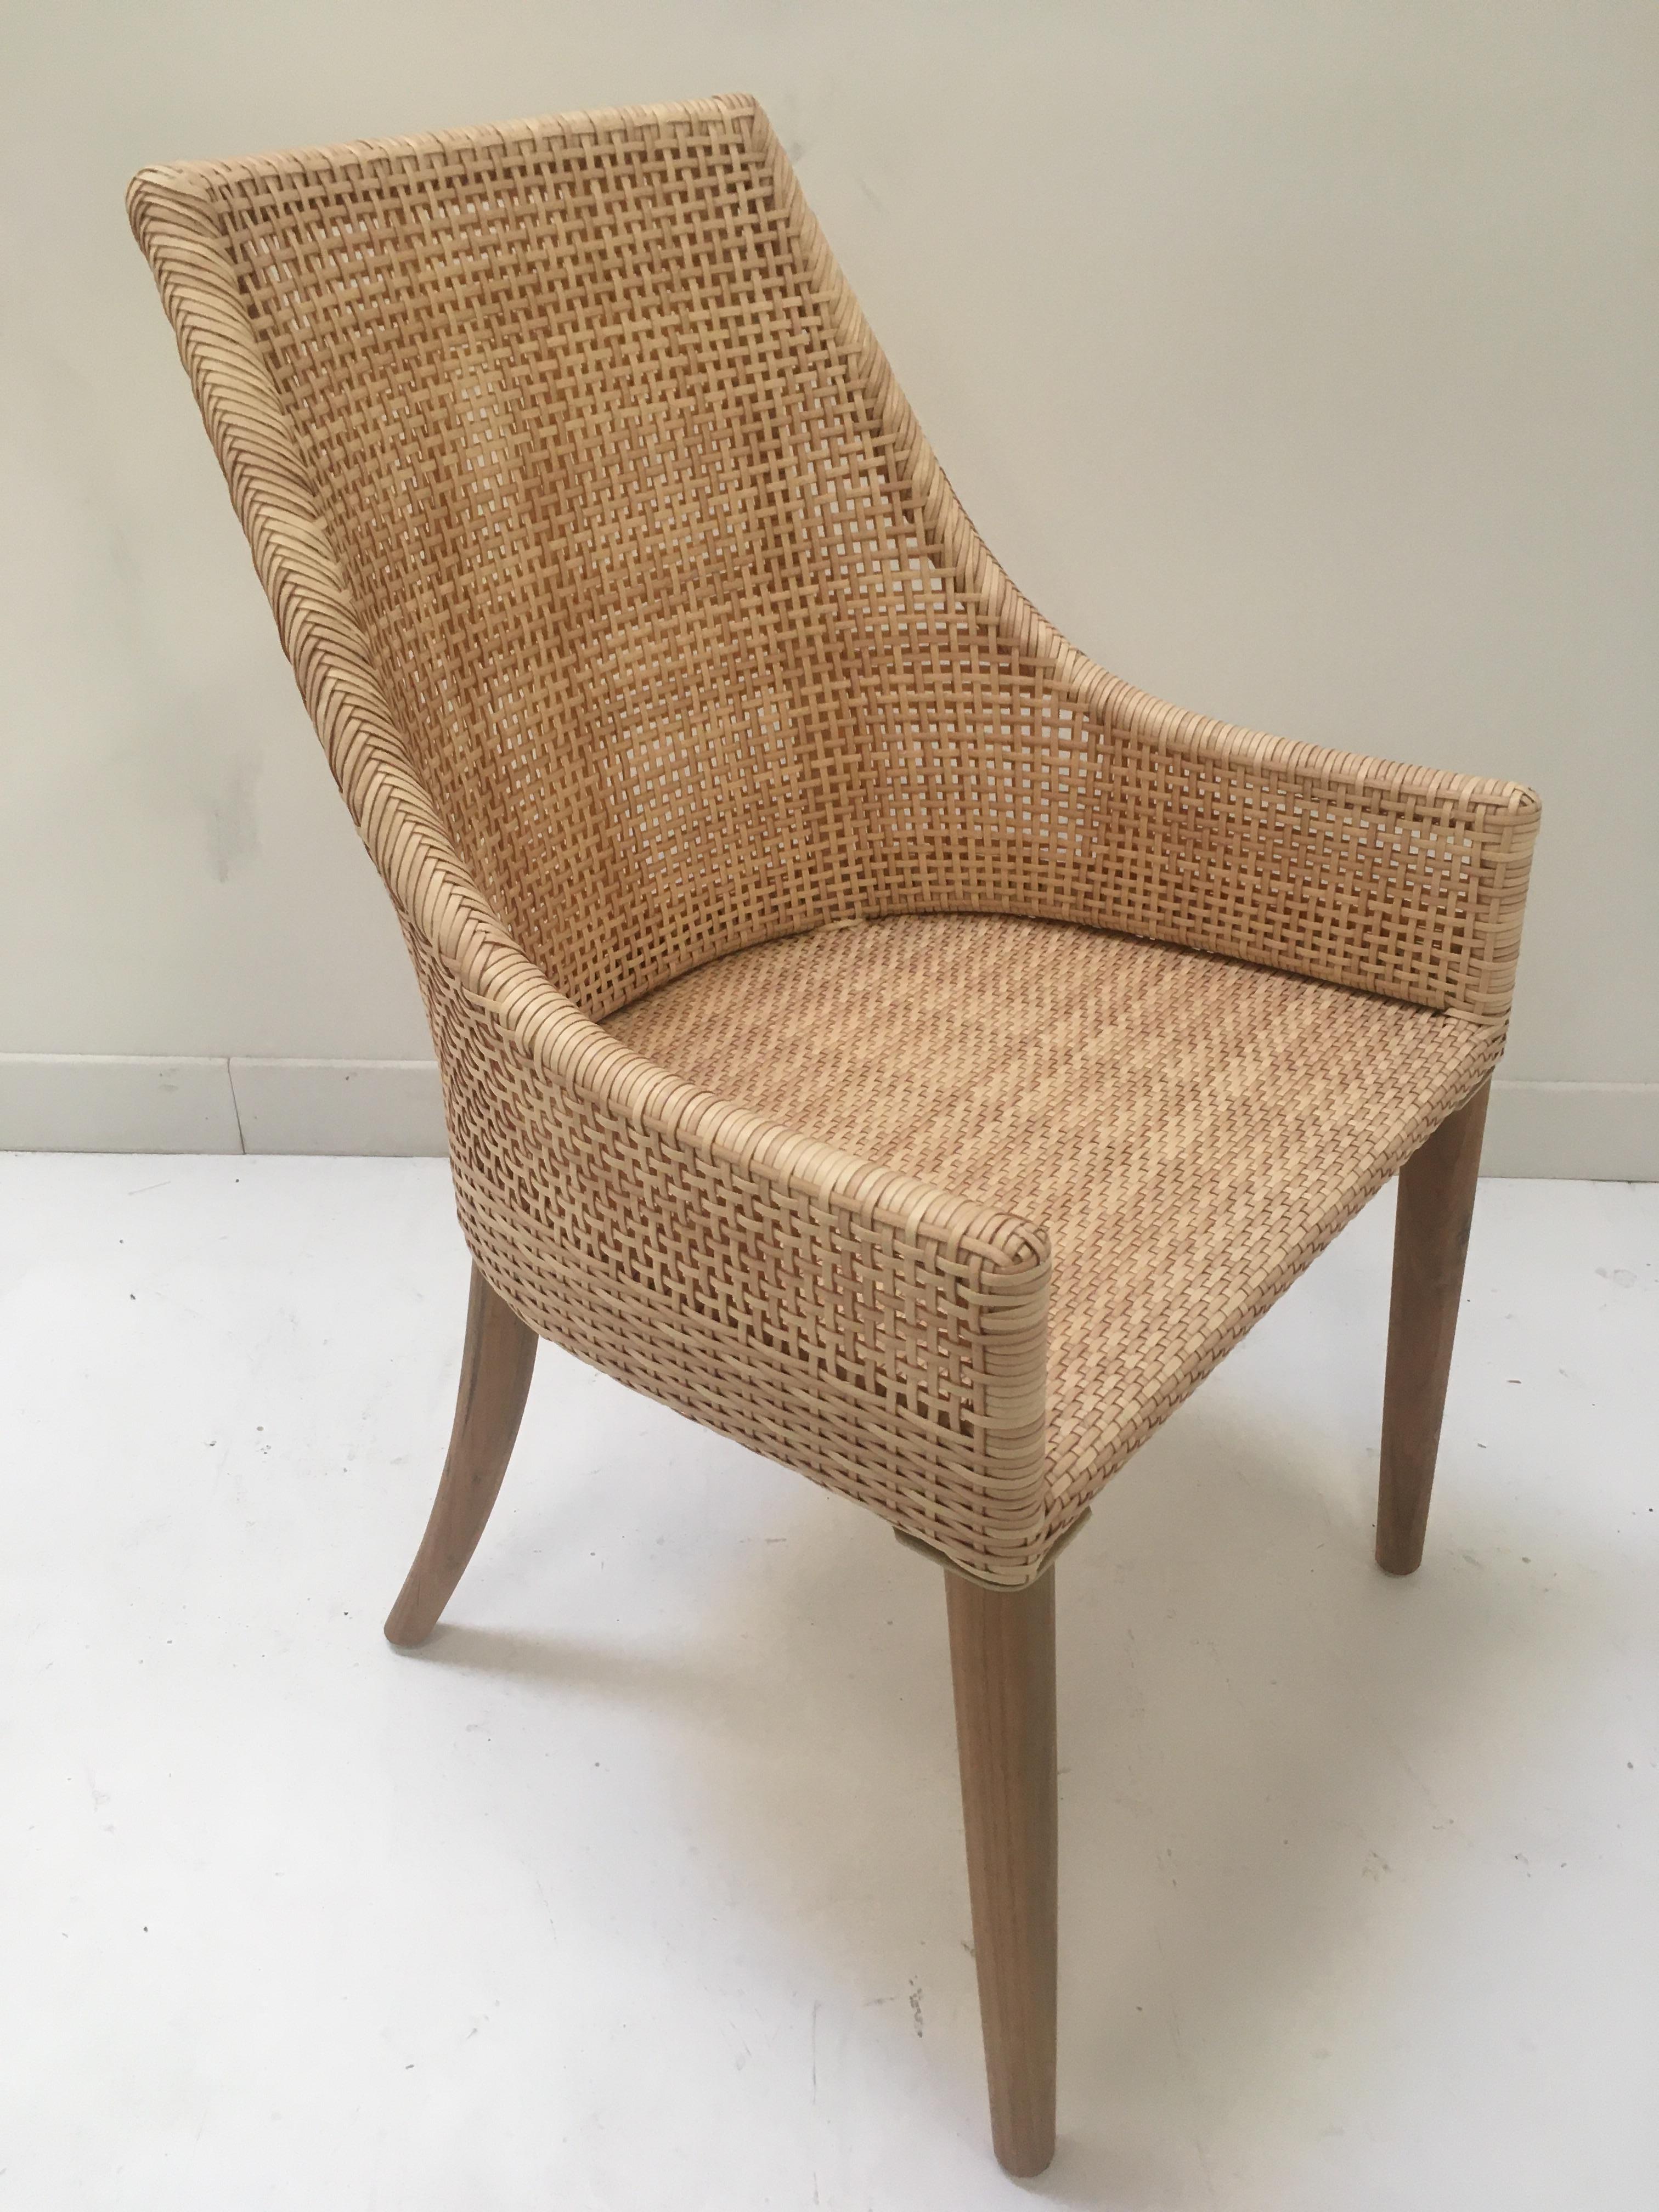 Contemporary Handcrafted Braided Resin Rattan Effect and Teak Wooden Outdoor Chair For Sale